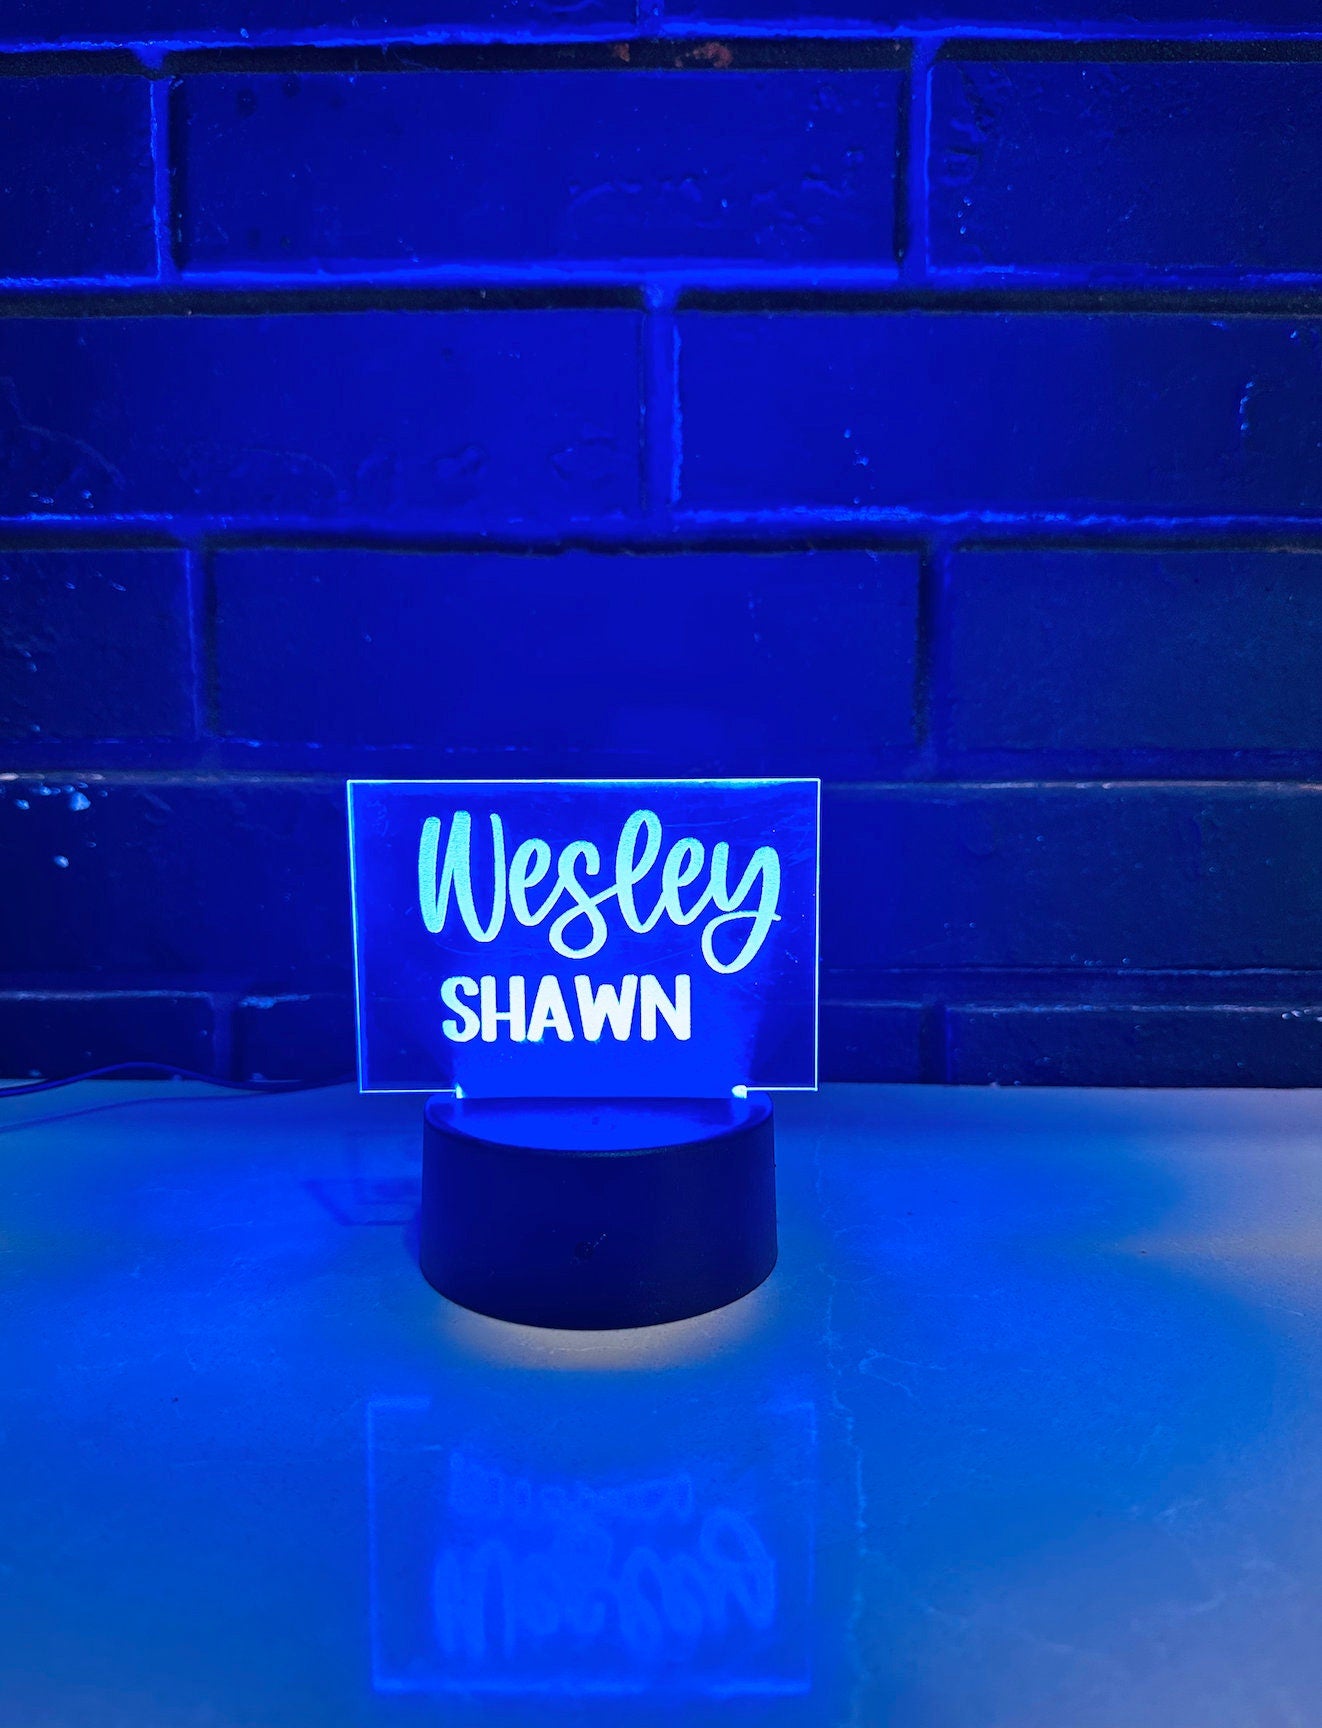 Your Custom Name Design Night Light Stand - 3D LED Lamp Base with Adjustable Colors